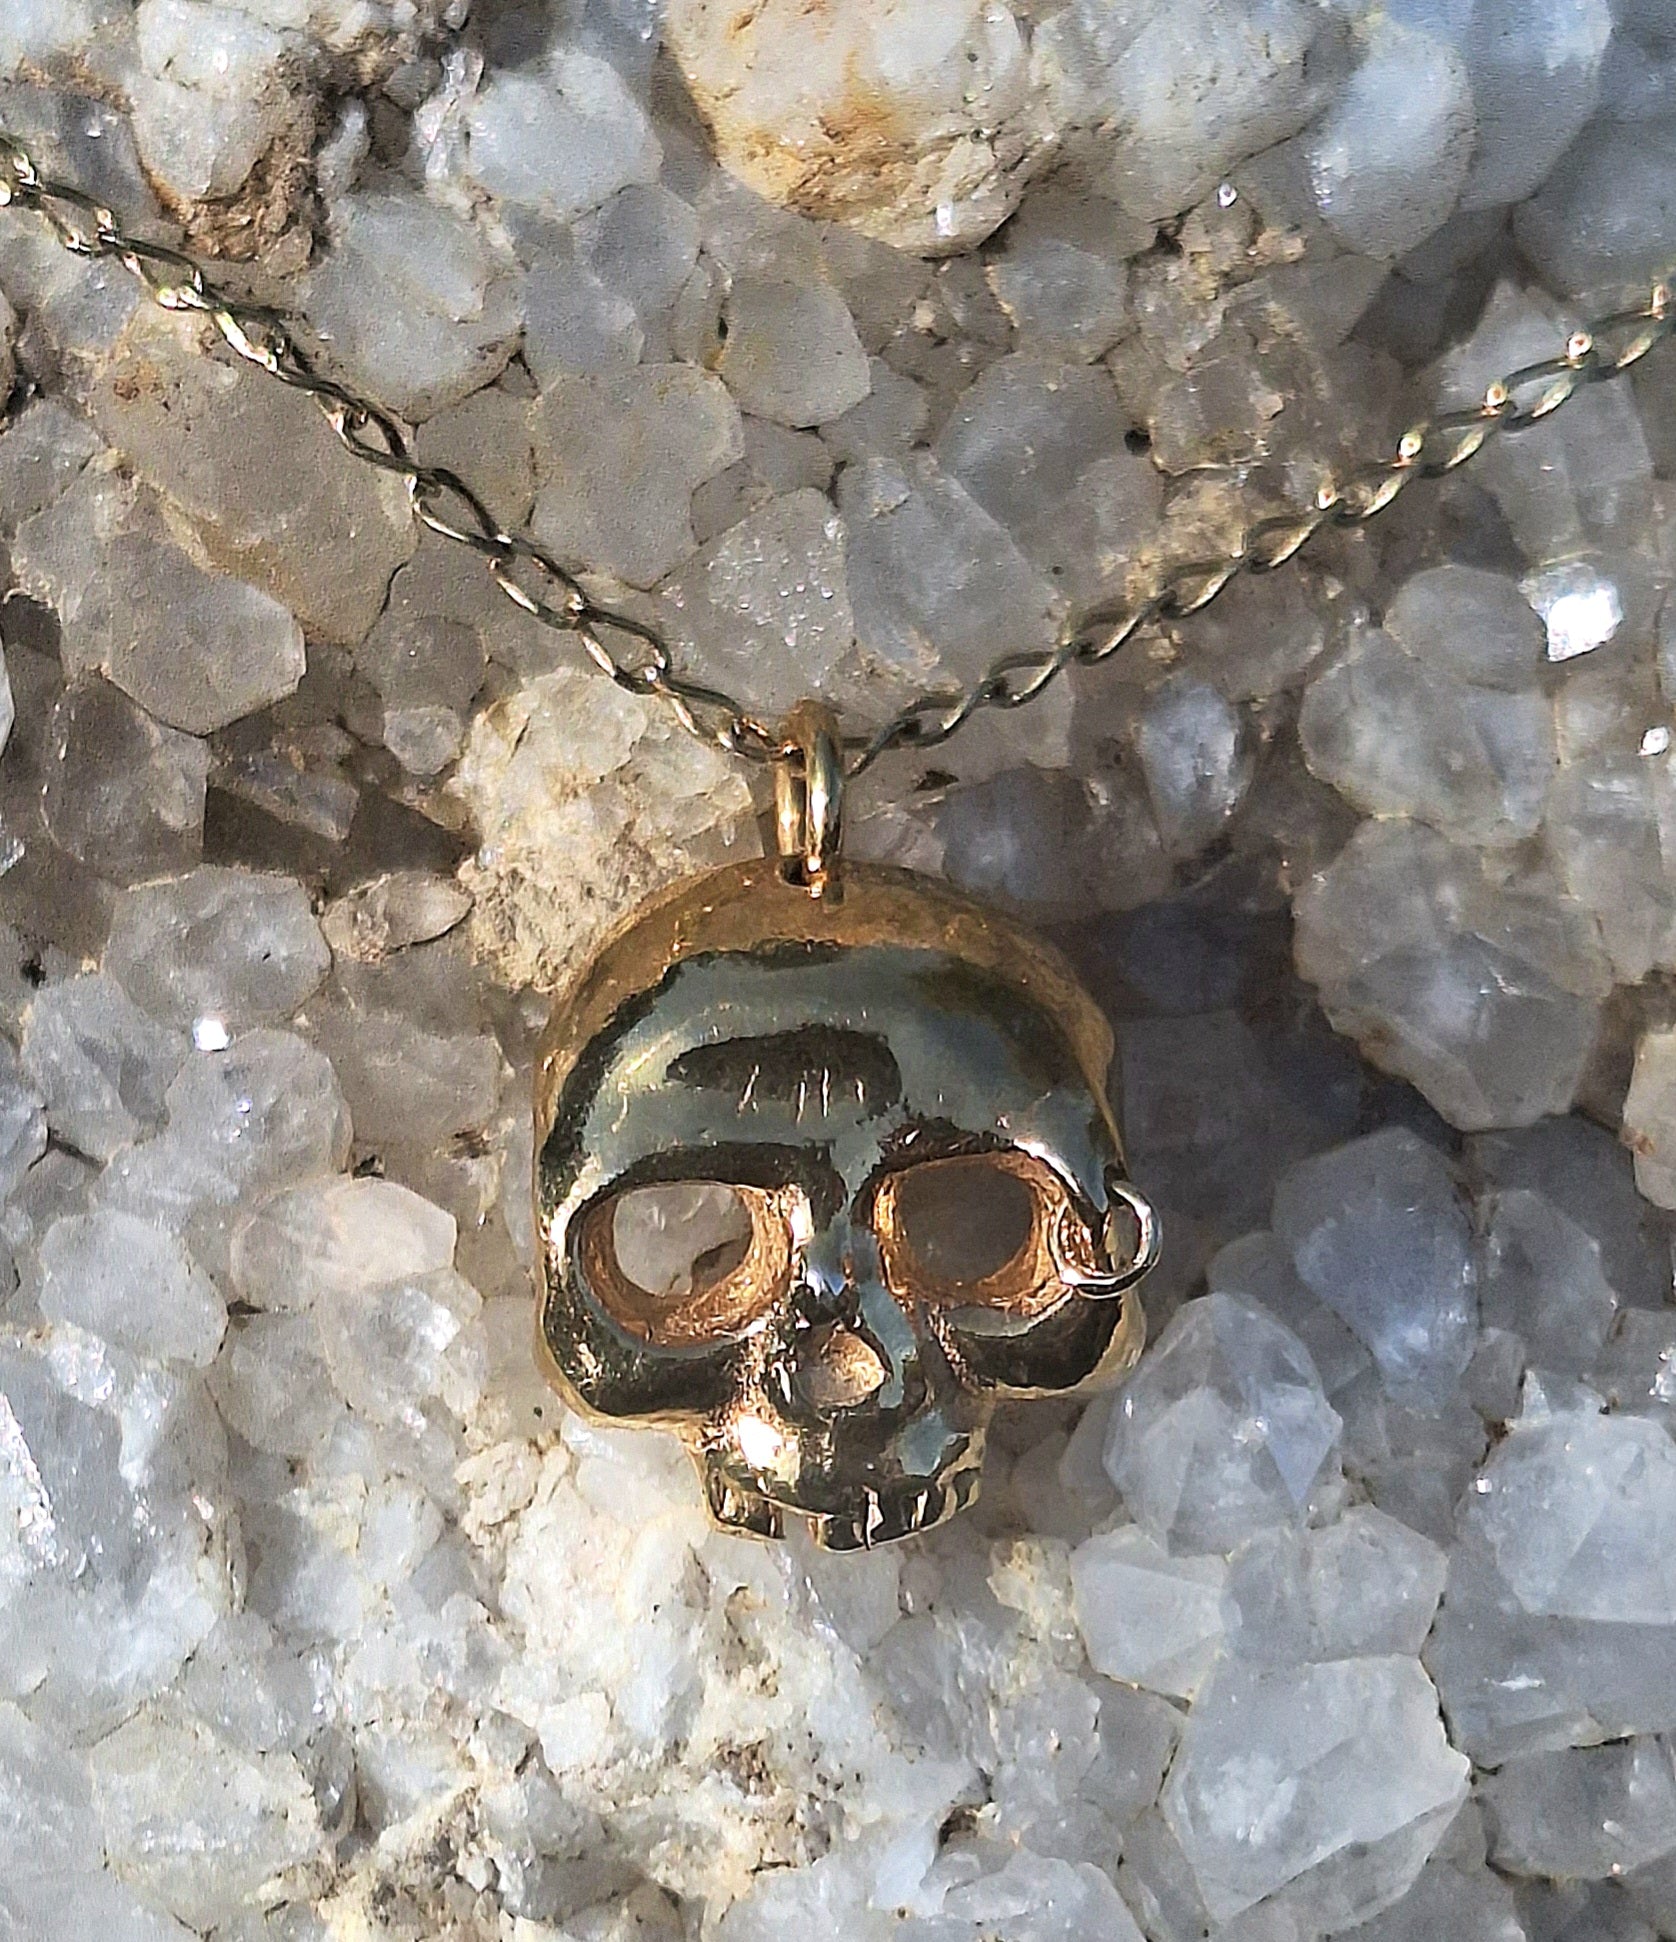 Grainne Mhaol Necklace - Gold Plated sterling silver skull necklace